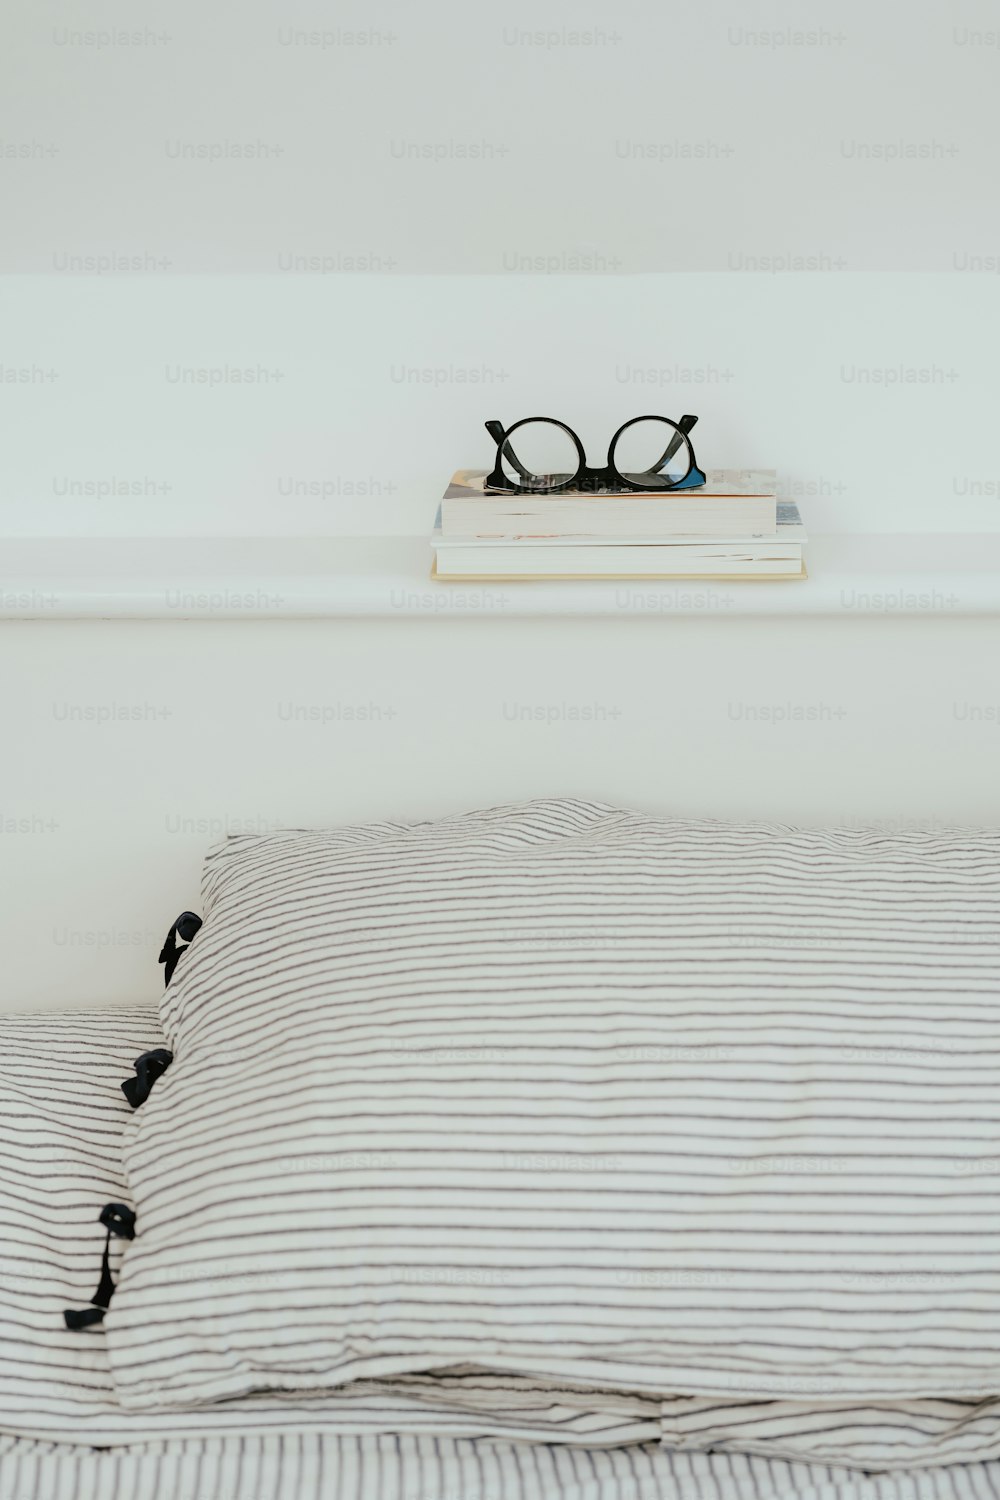 a pair of glasses sitting on top of a bed